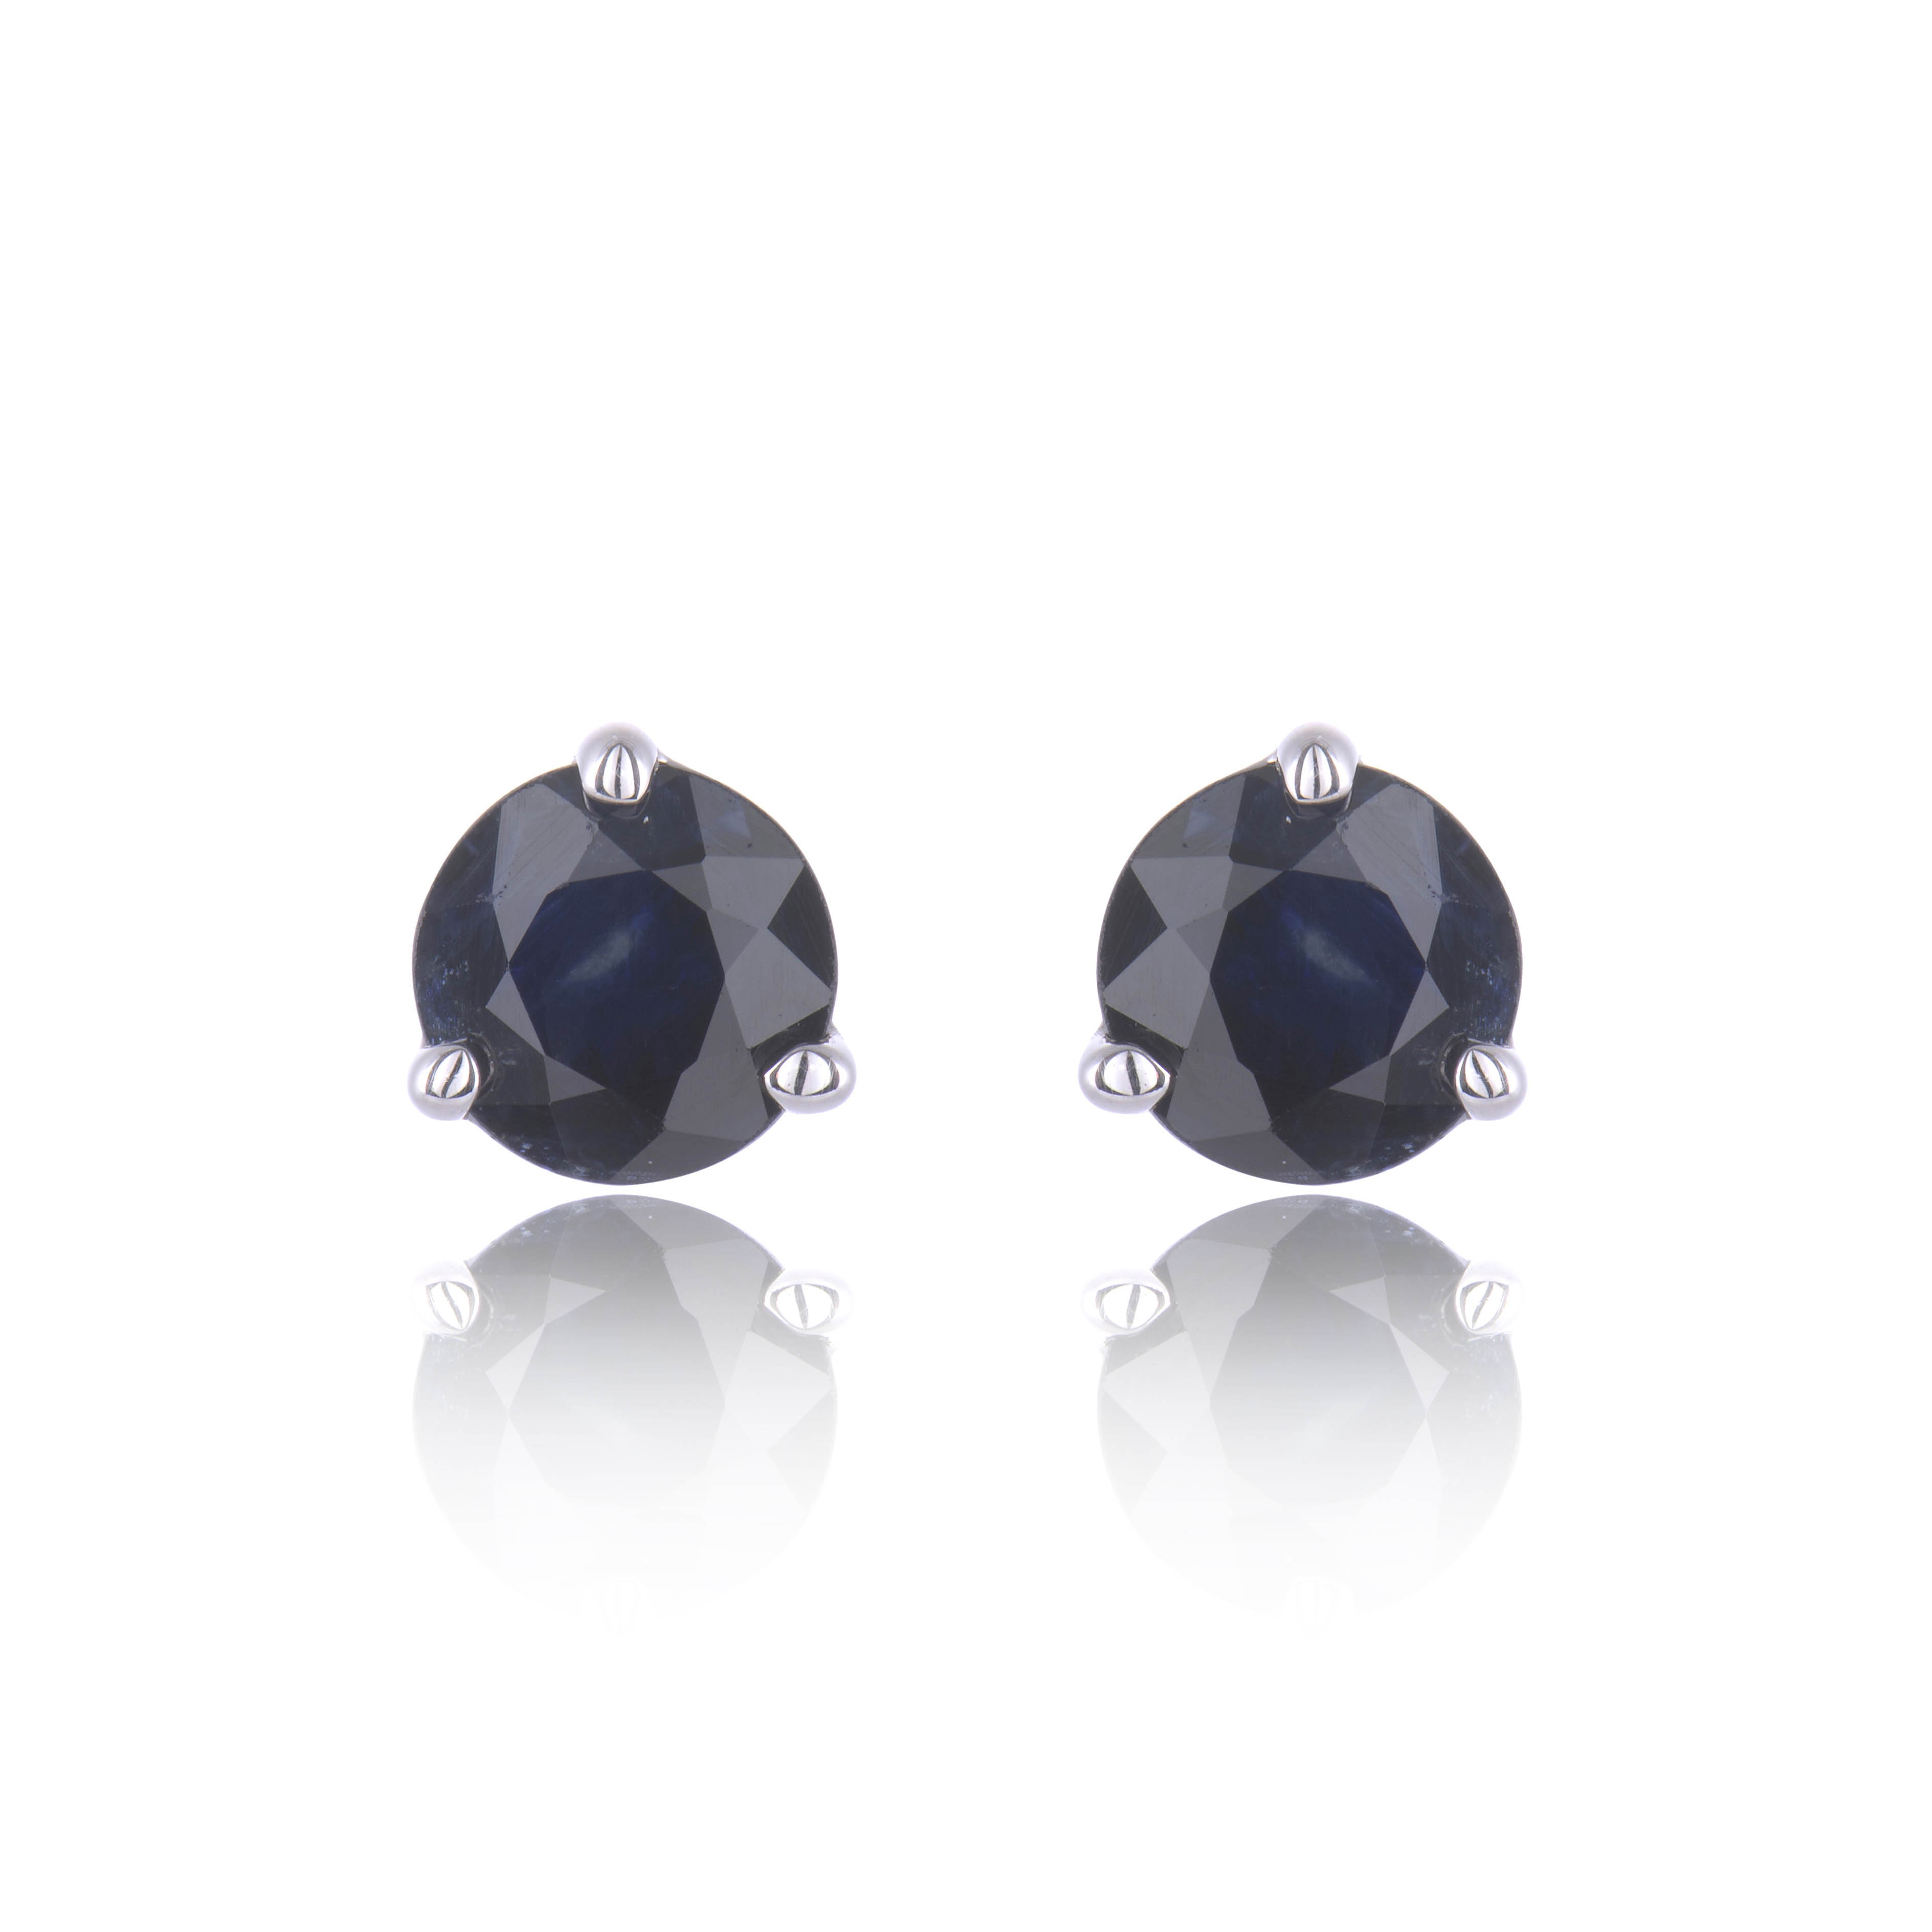 Round Cut Natural Diamond Stud Earrings In 18k White Gold 